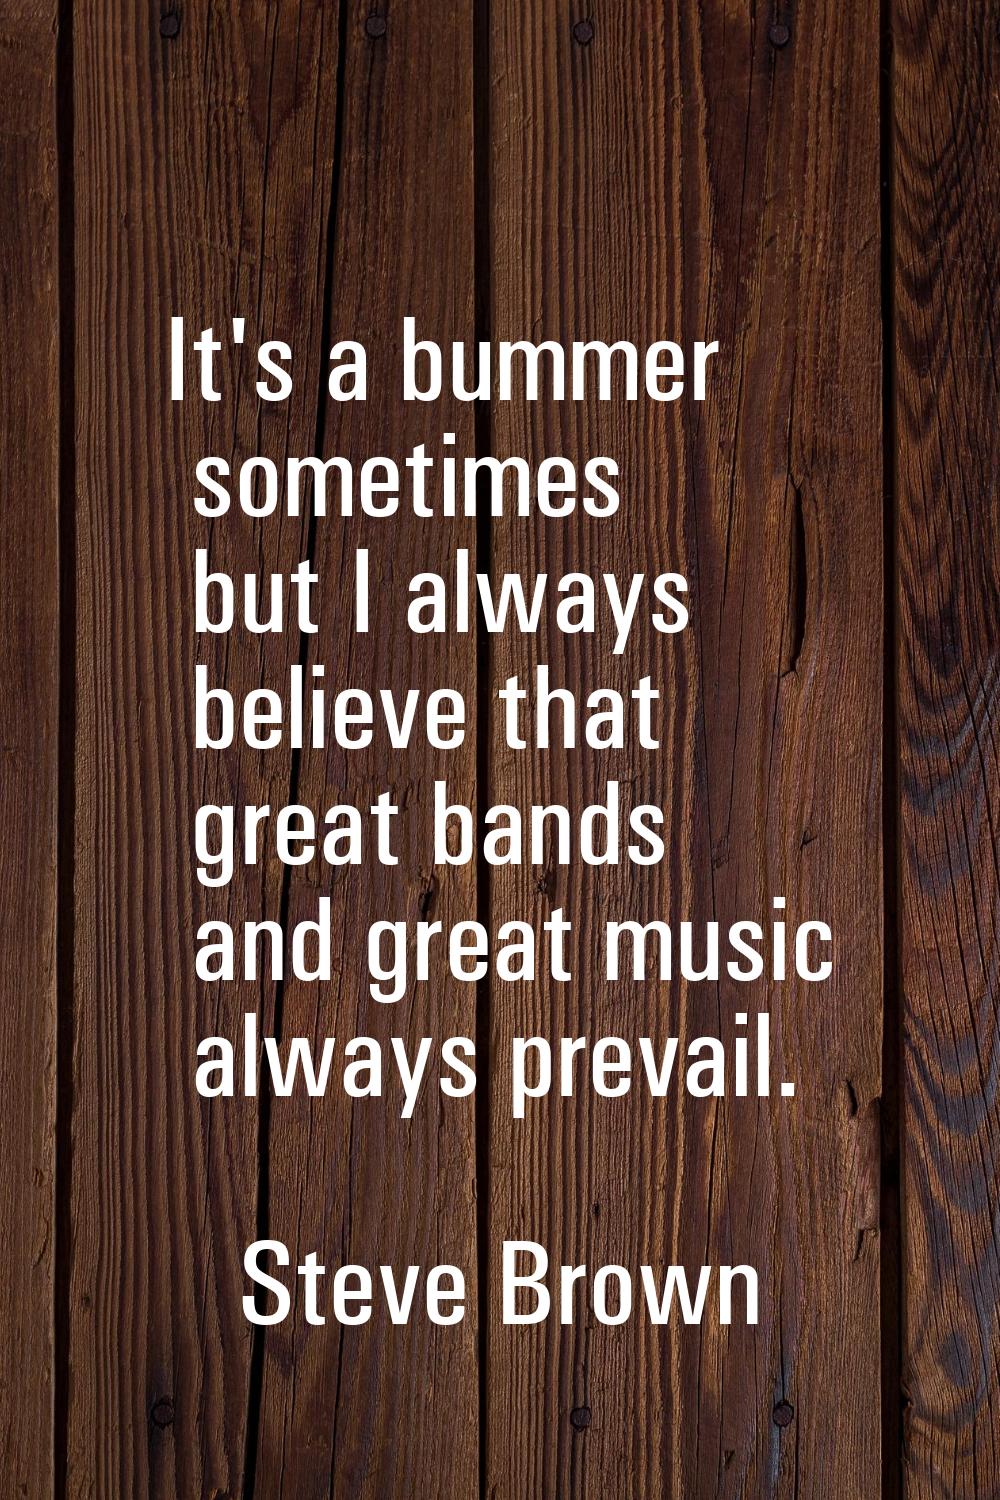 It's a bummer sometimes but I always believe that great bands and great music always prevail.